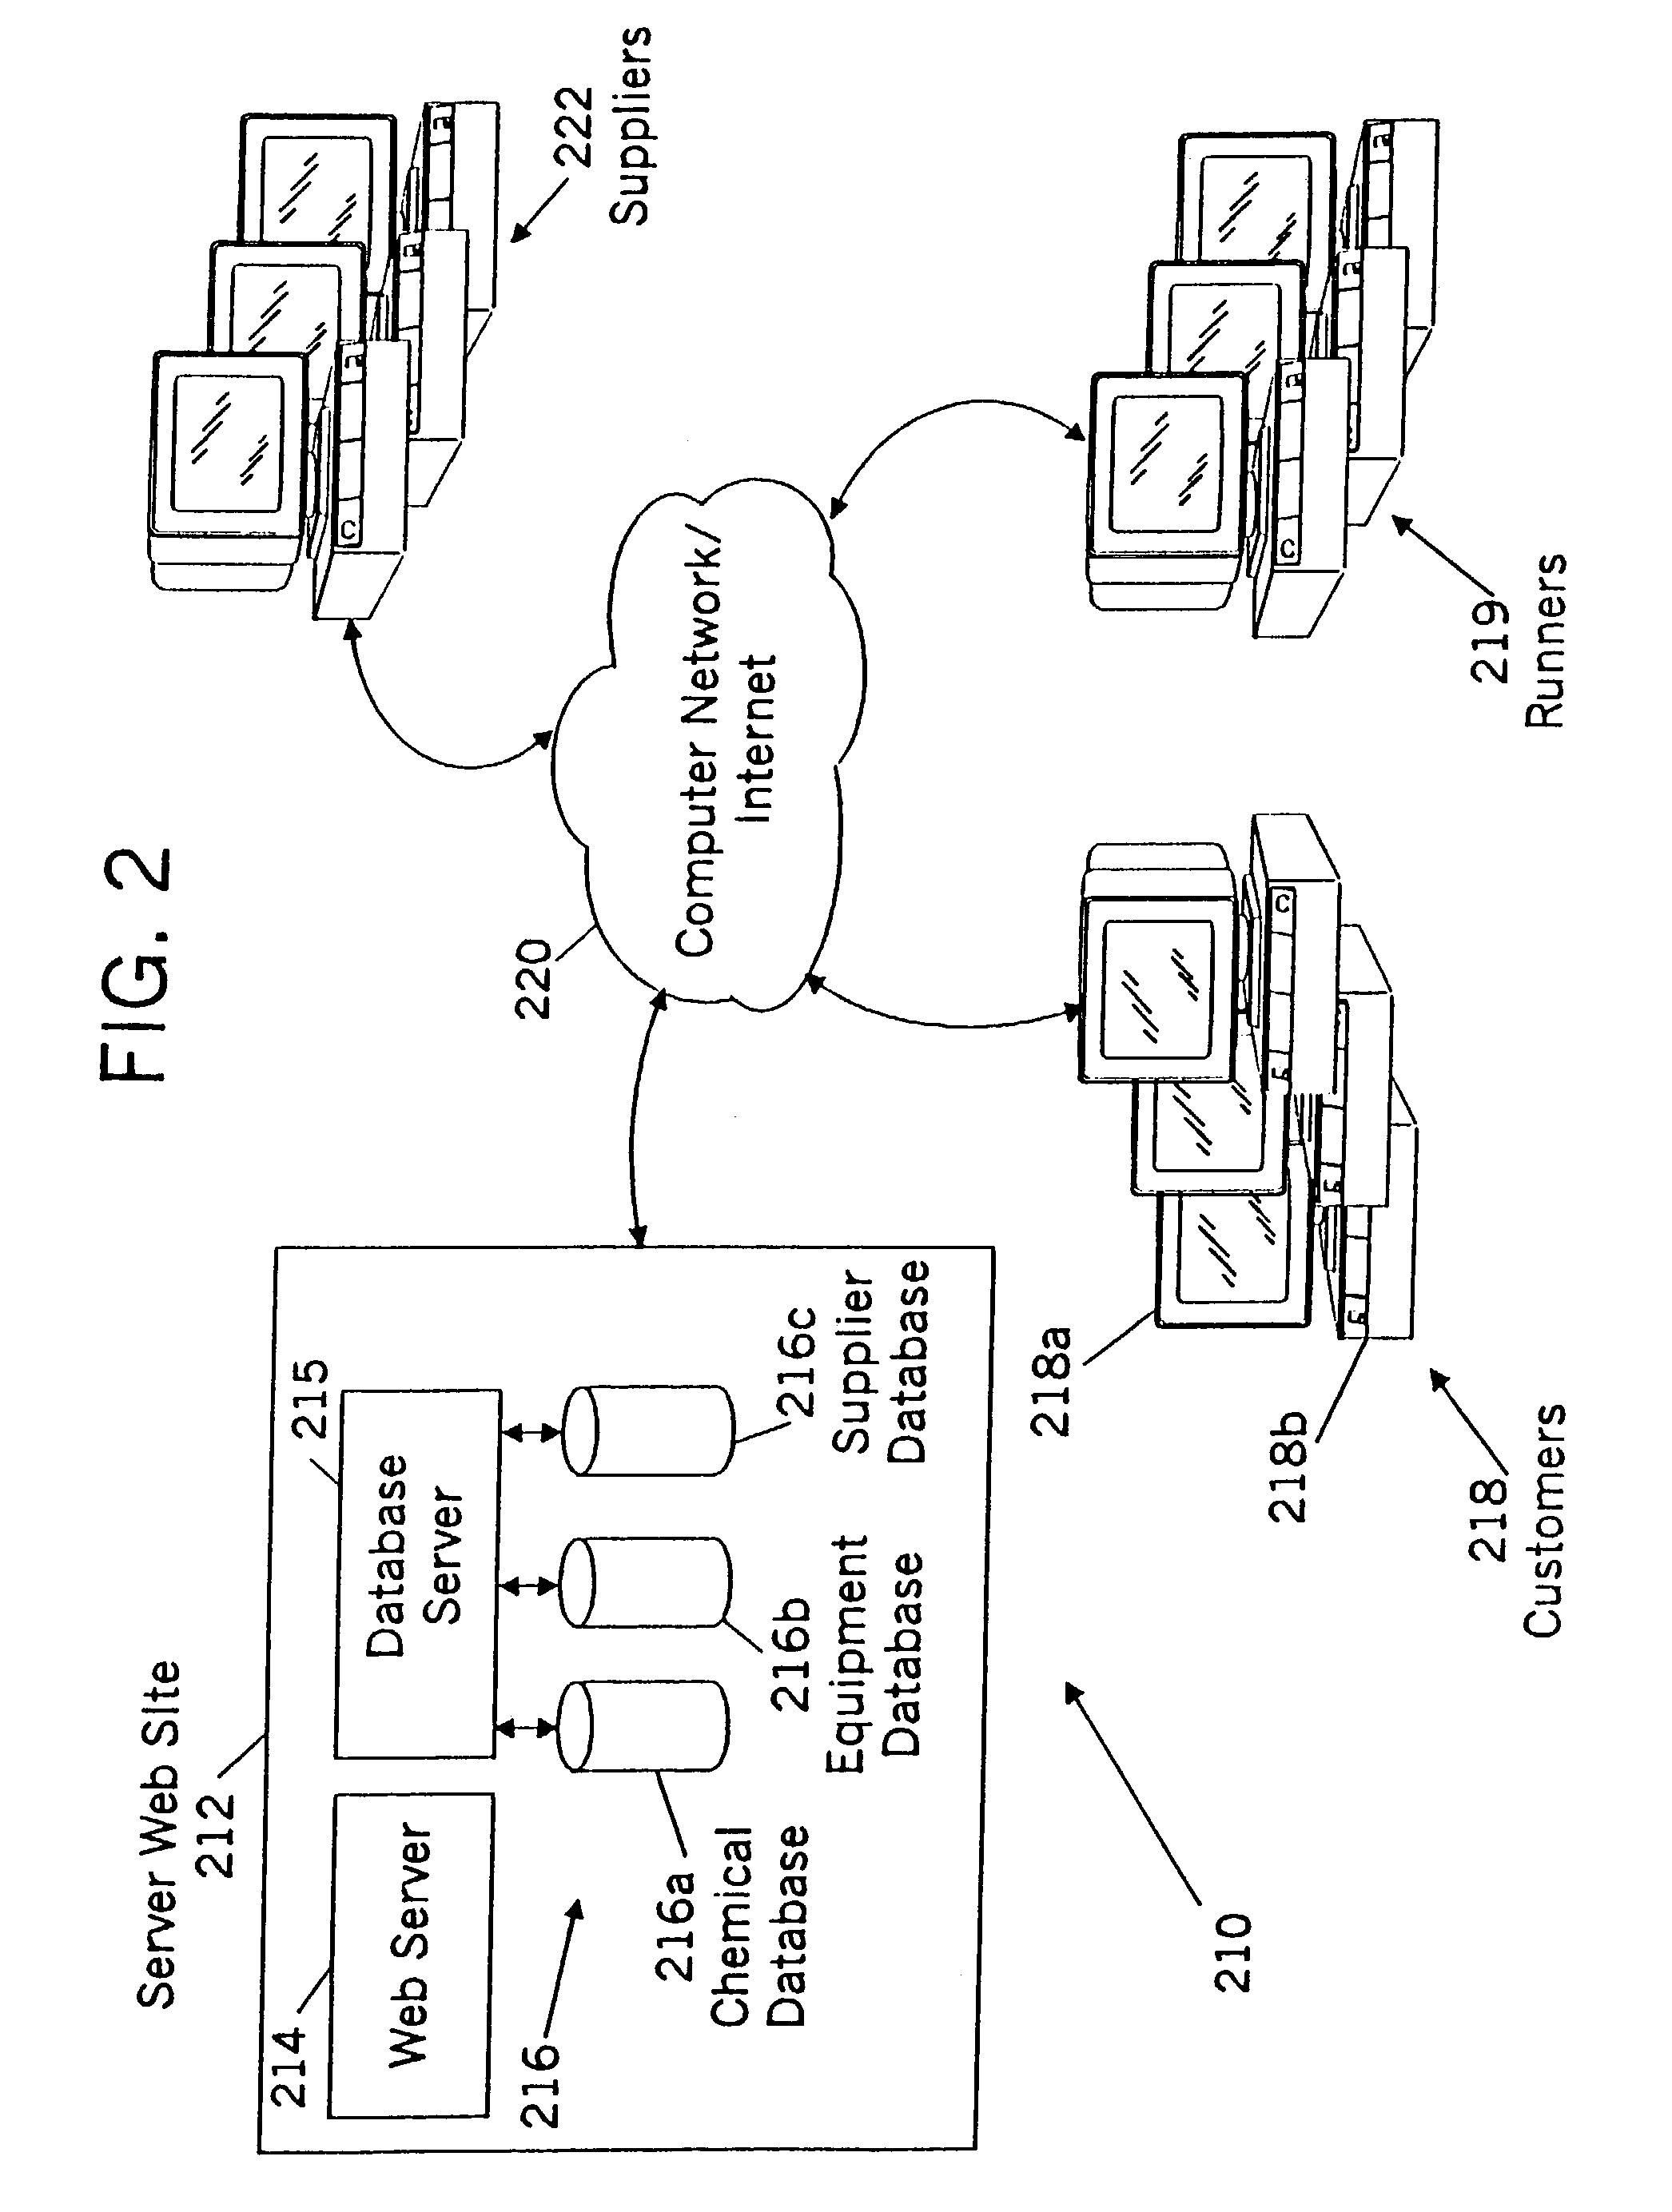 Systems, methods and computer program products for determining parameters for chemical synthesis